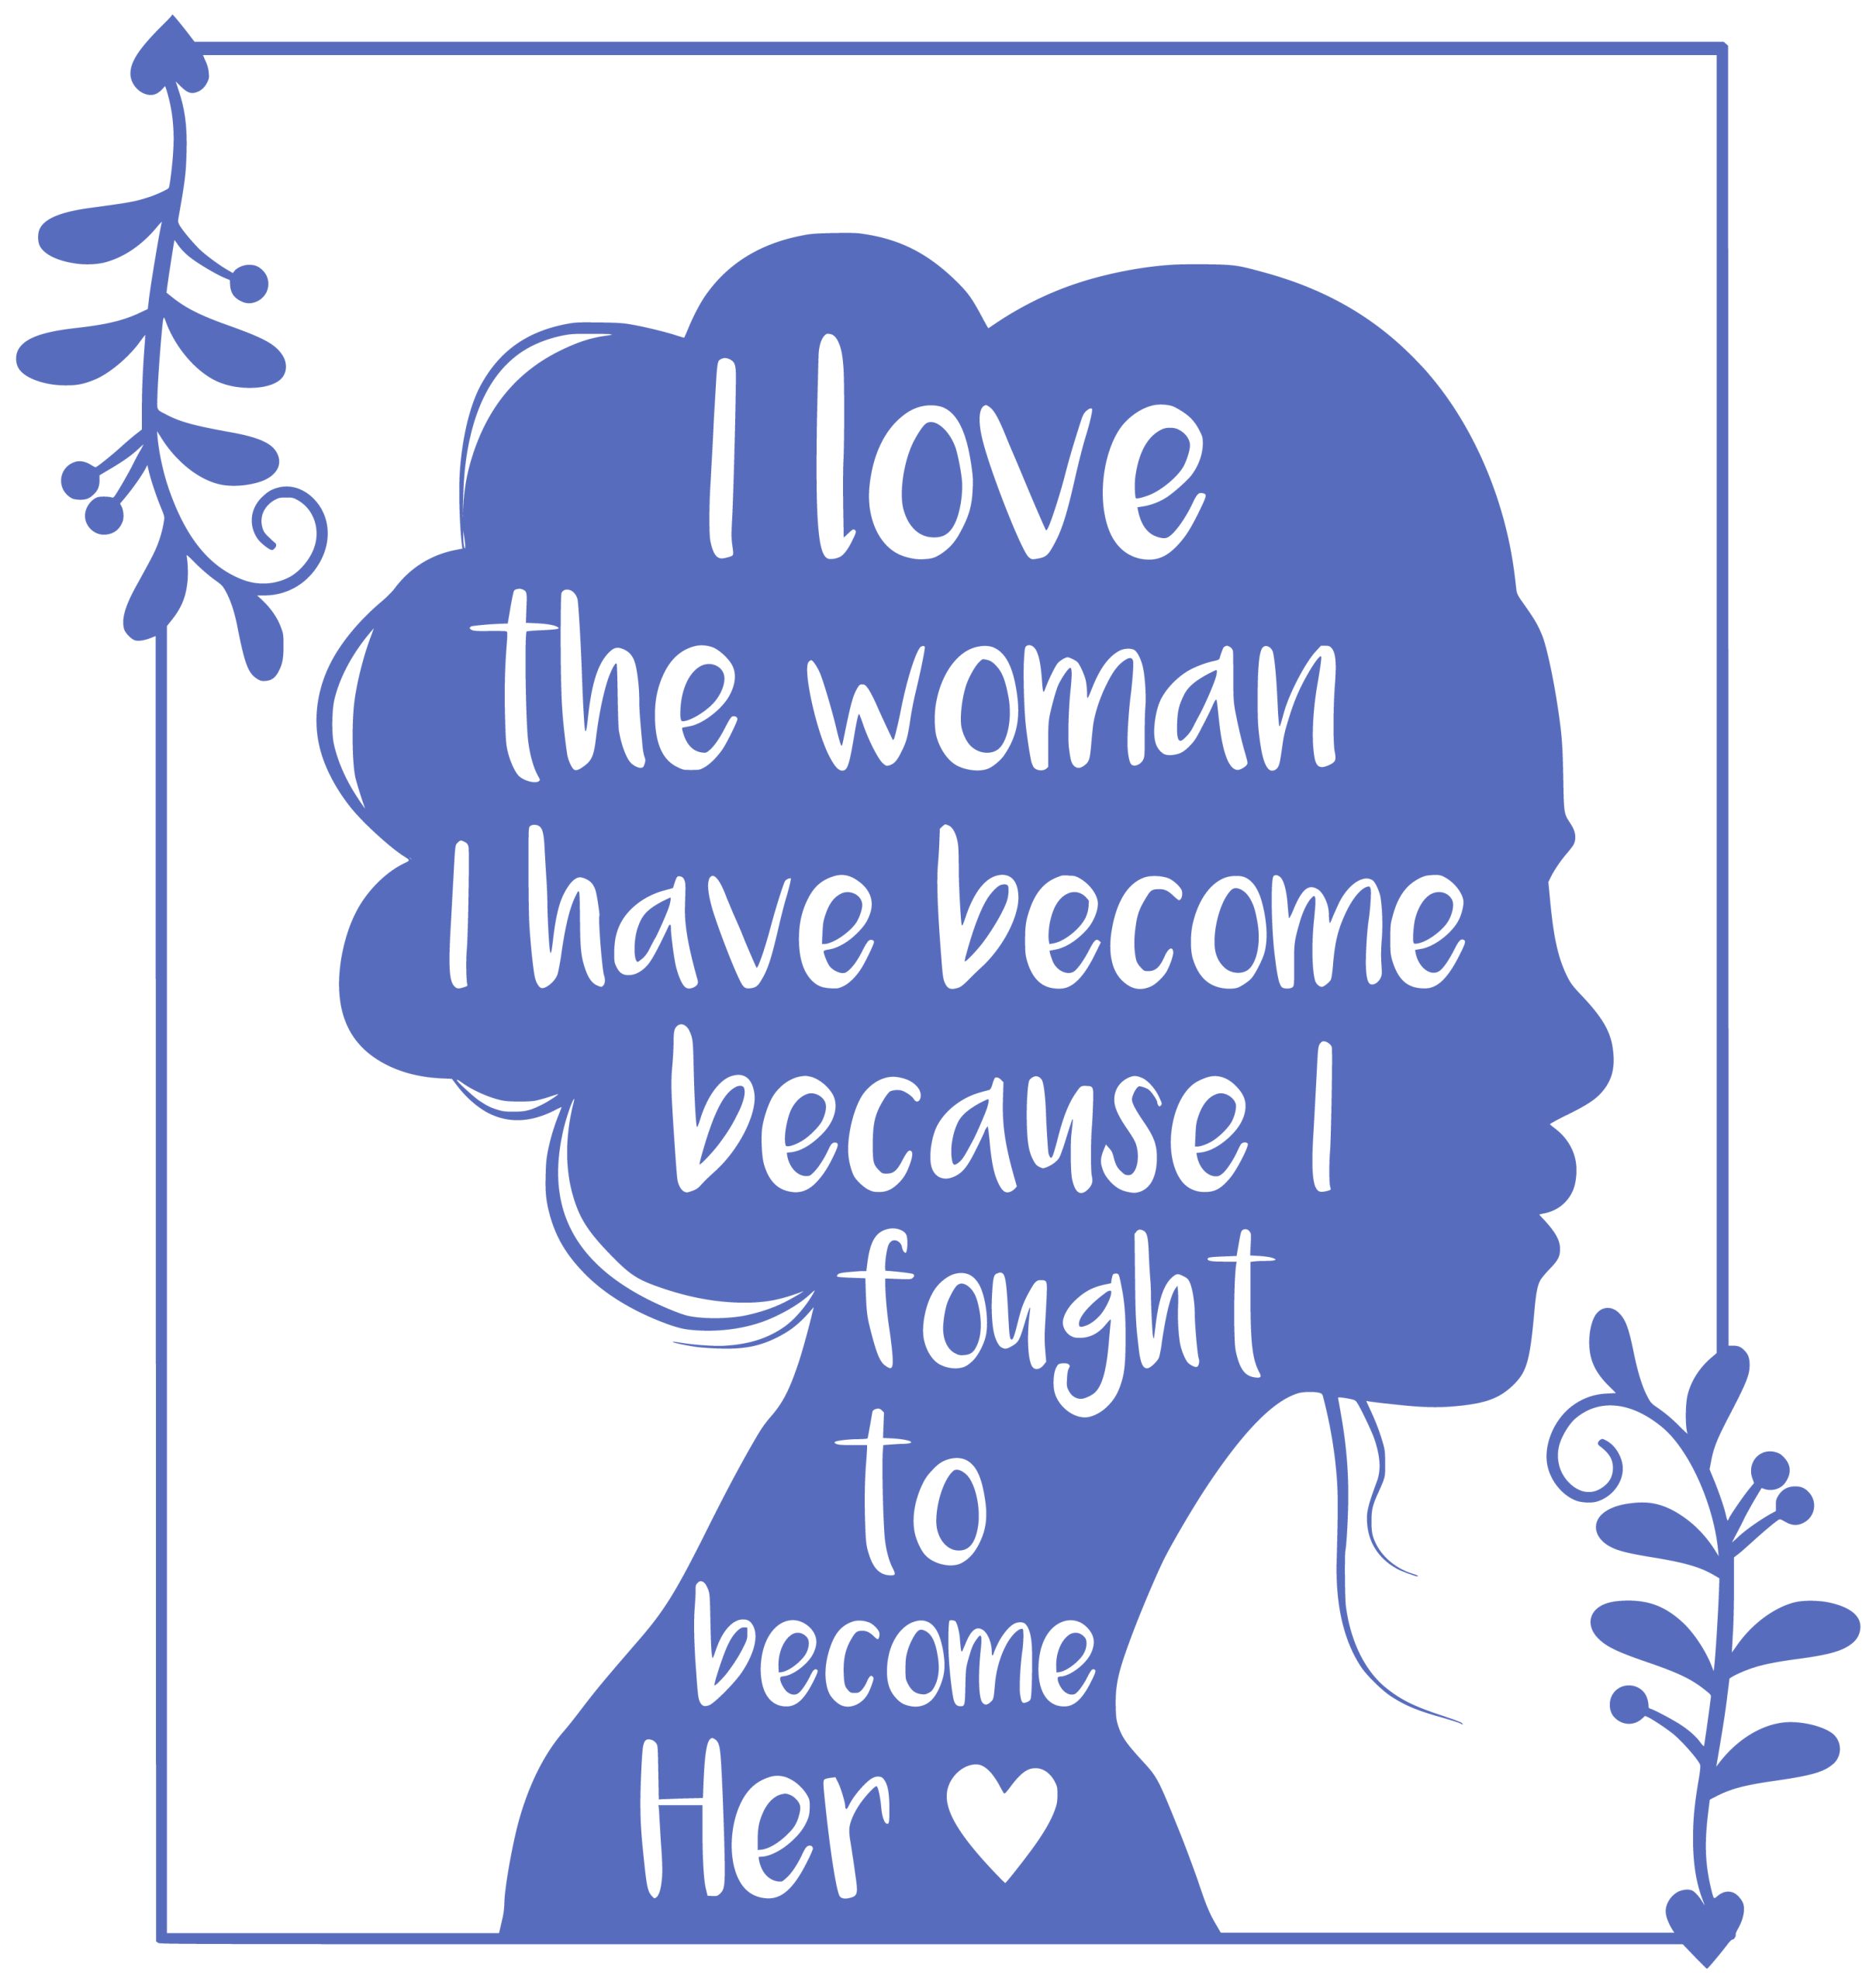 I love the woman i have because i fought to become her SVG Boss Lady  Black Lives Matter  Lady Woman Diva Tshirt Cut File Cricut Silhouette Women Empowerment svg Feminism svg Girl Power